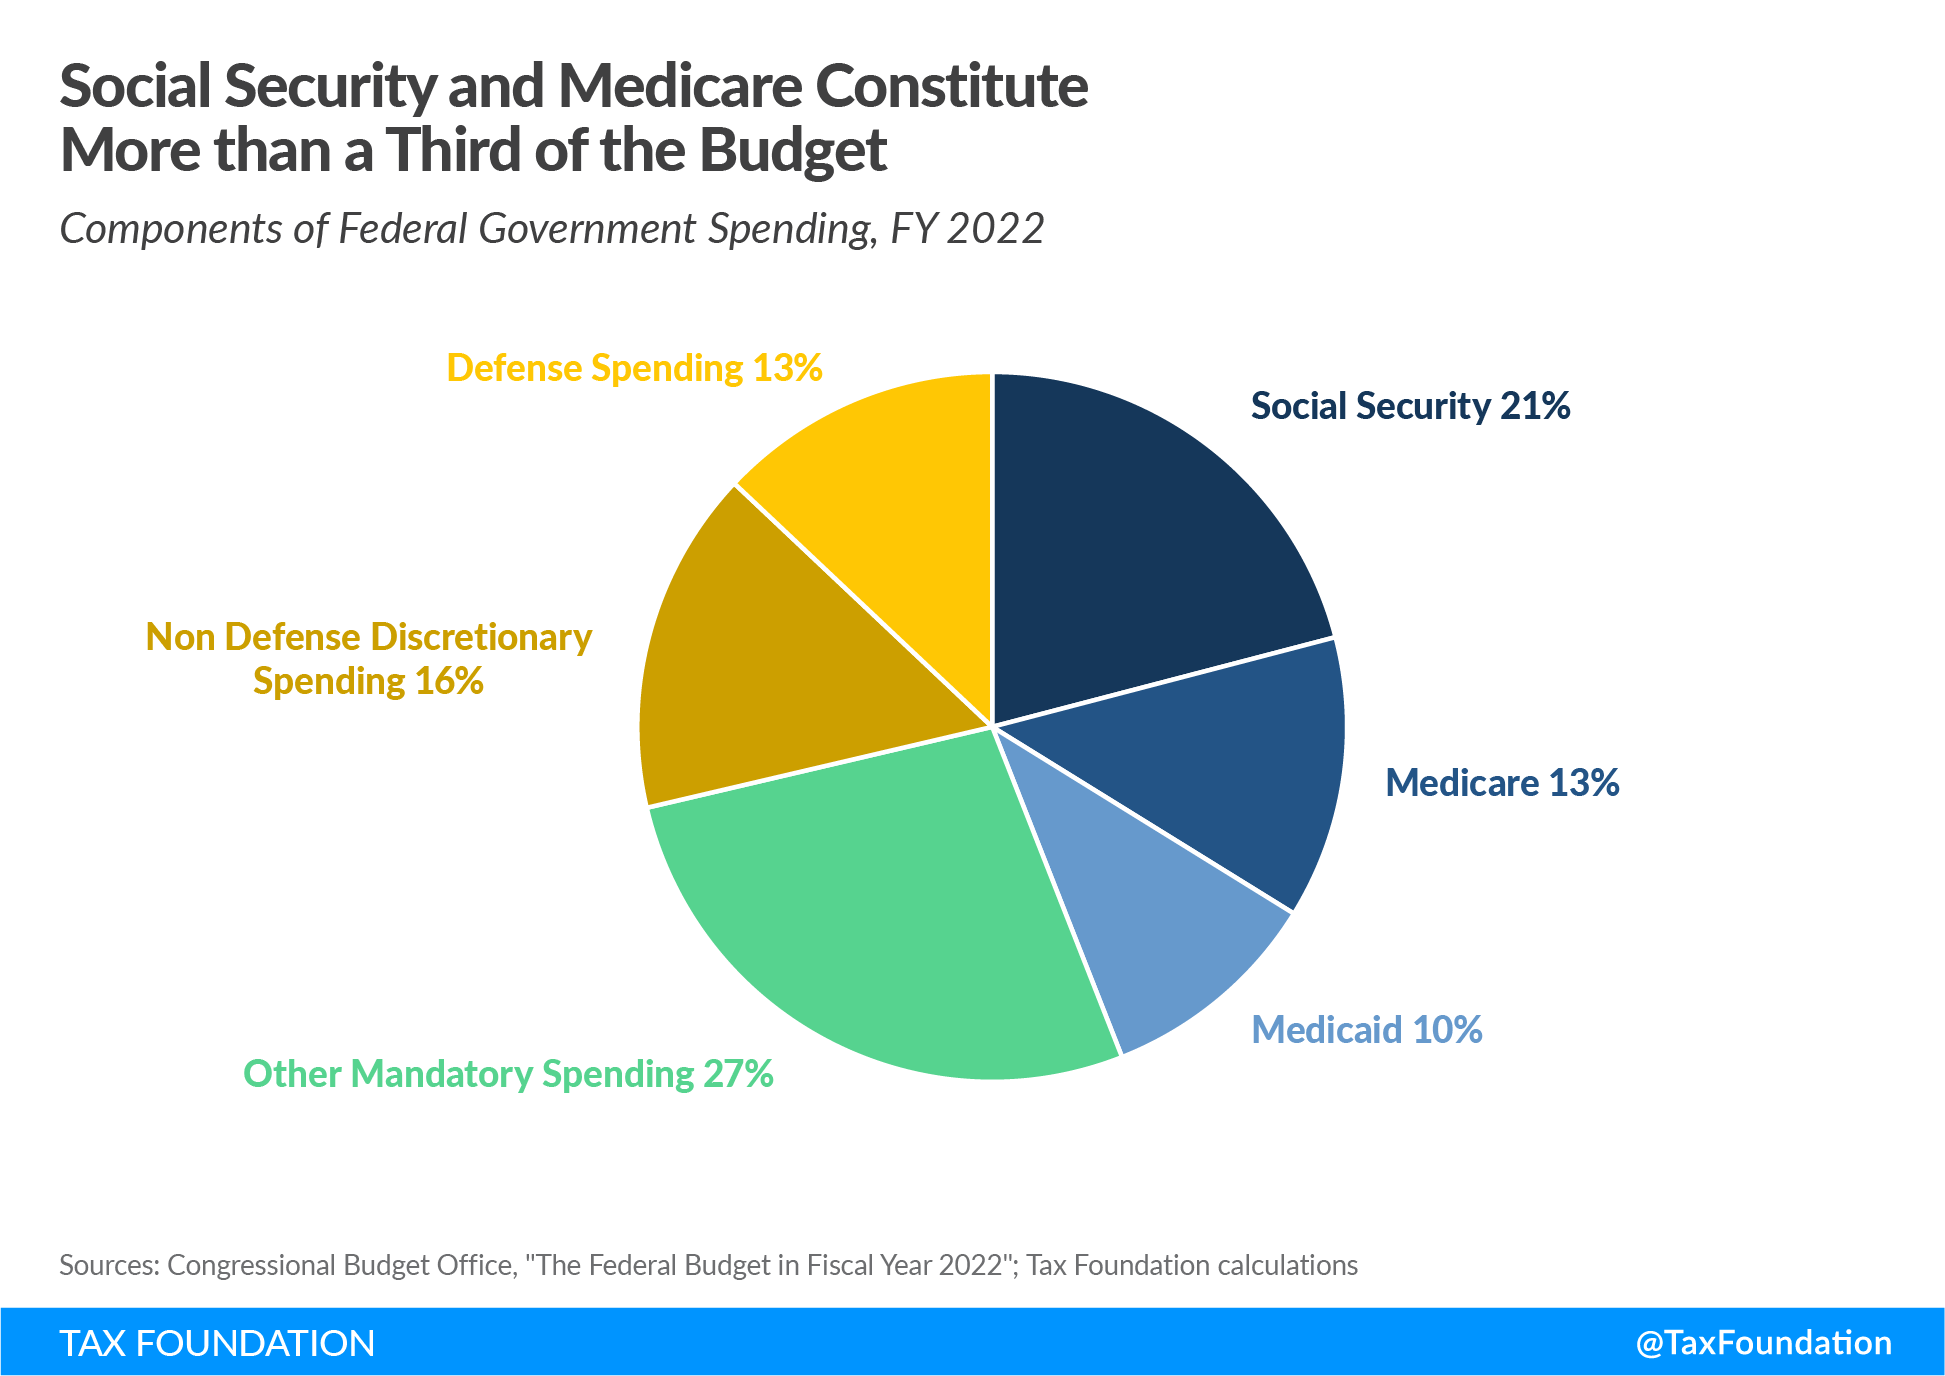 Tackling US debt crisis requires Medicare reform and Social Security reform to reduce the deficit